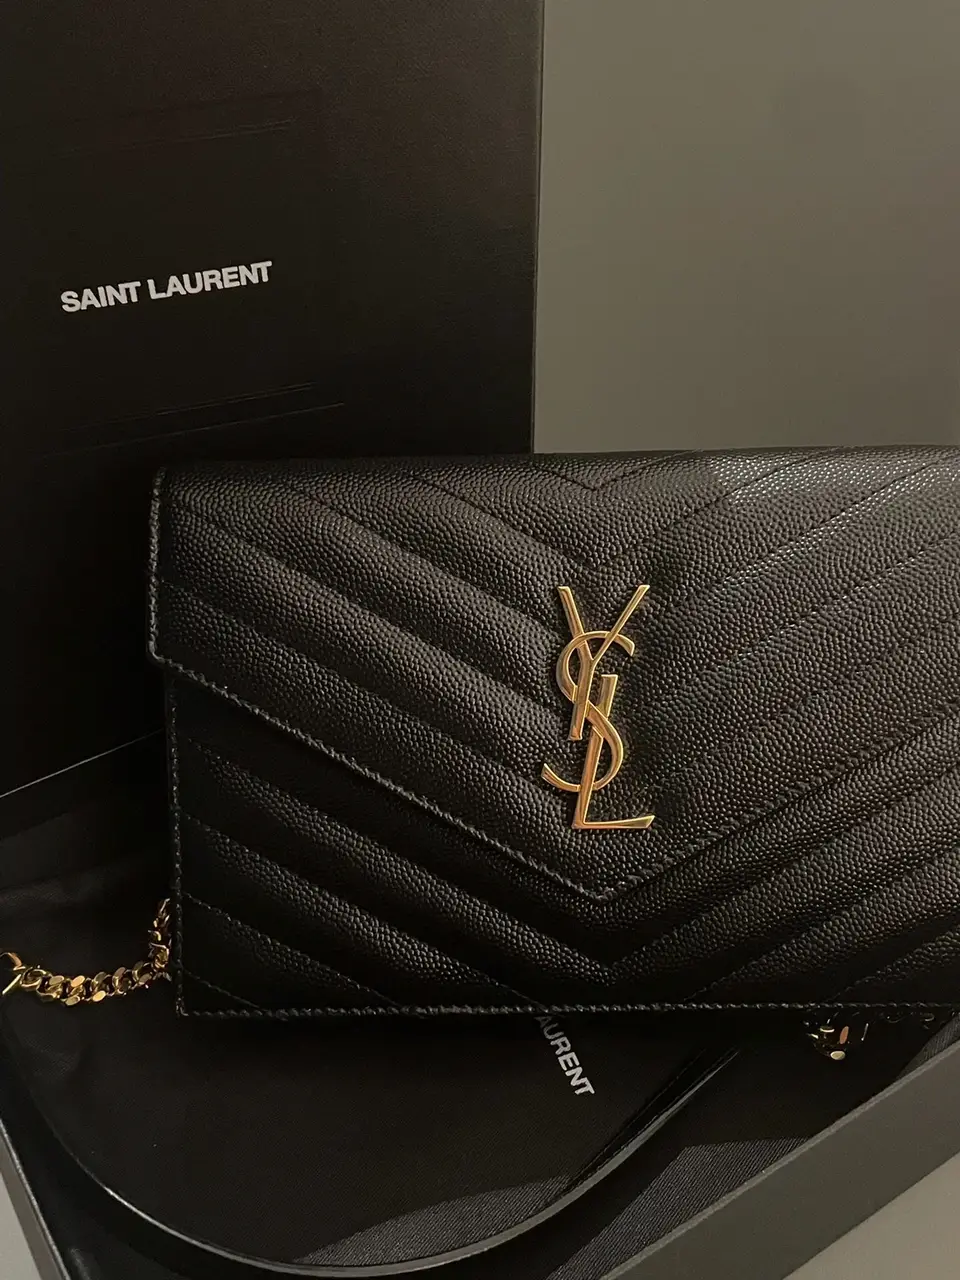 Added a YSL envelope bag to my collection! : r/handbags